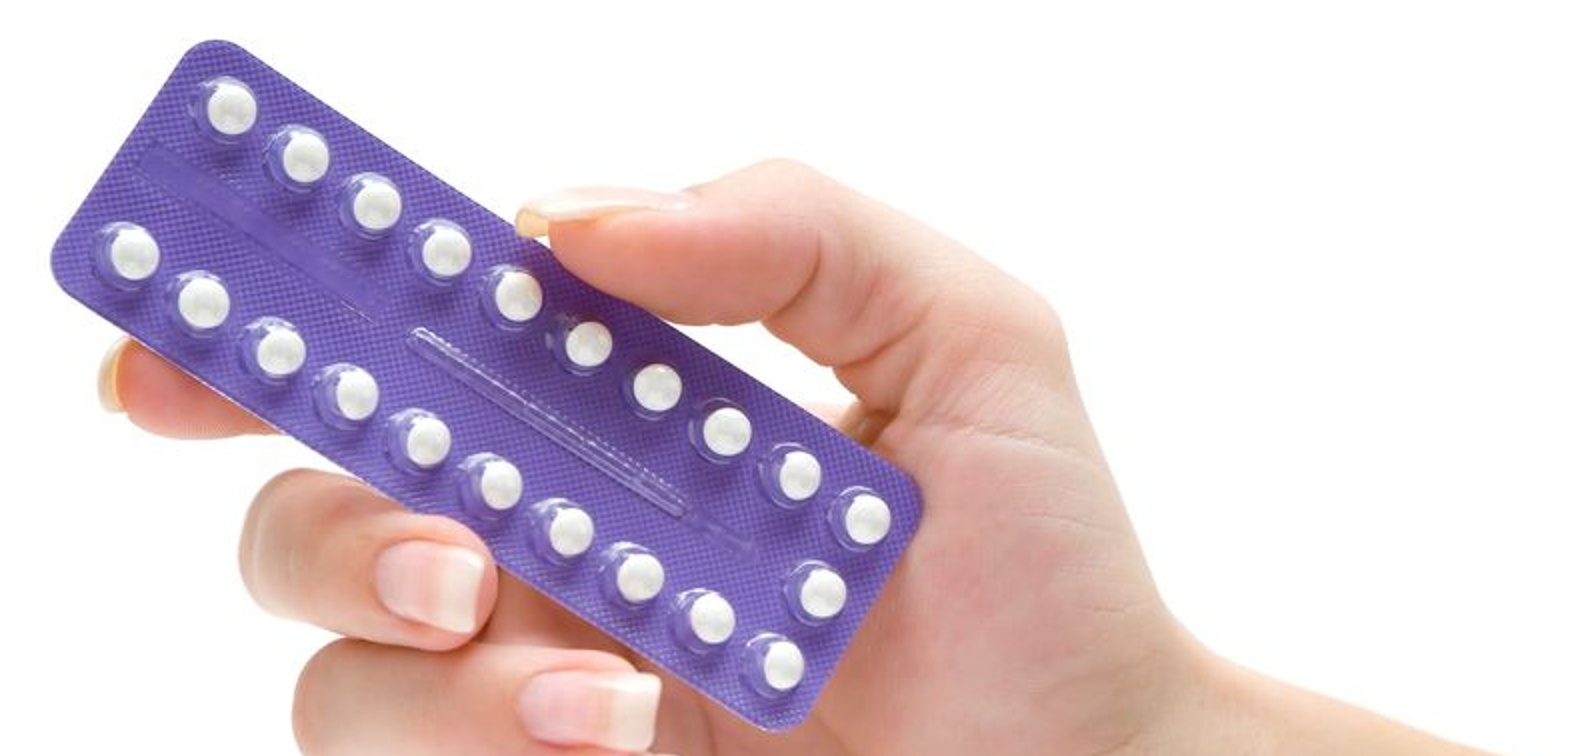 Birth control shot vs. the pill: Which is better?